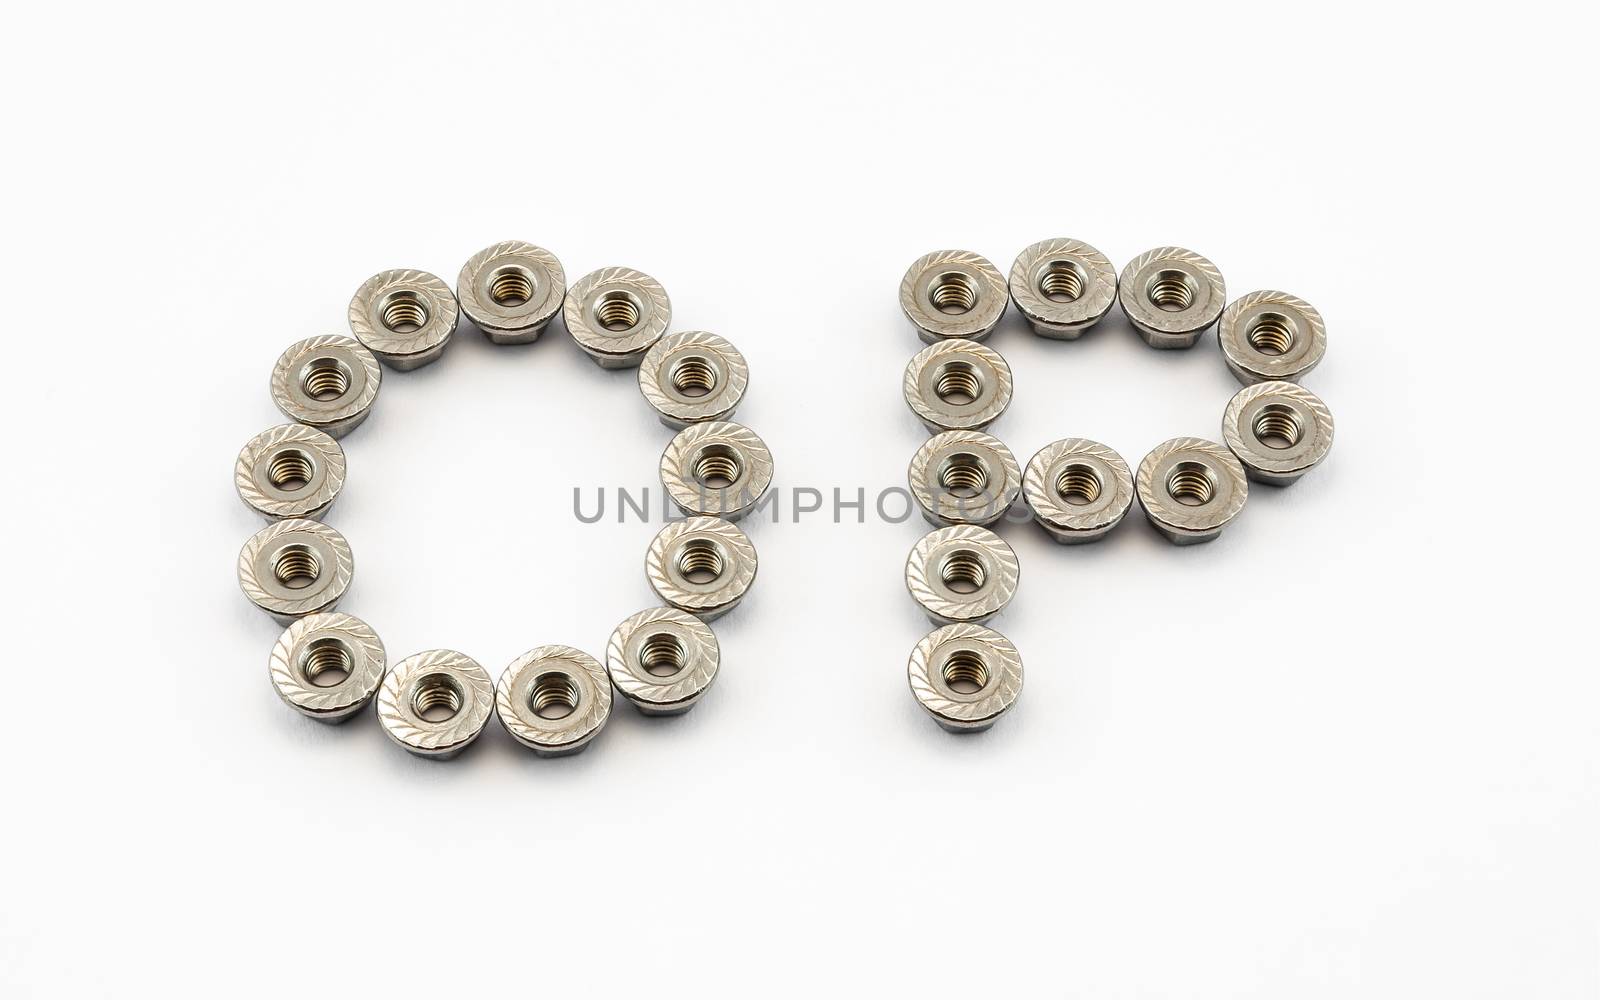 O and P Alphabet, Created by Stainless Steel Hex Flange Nuts.